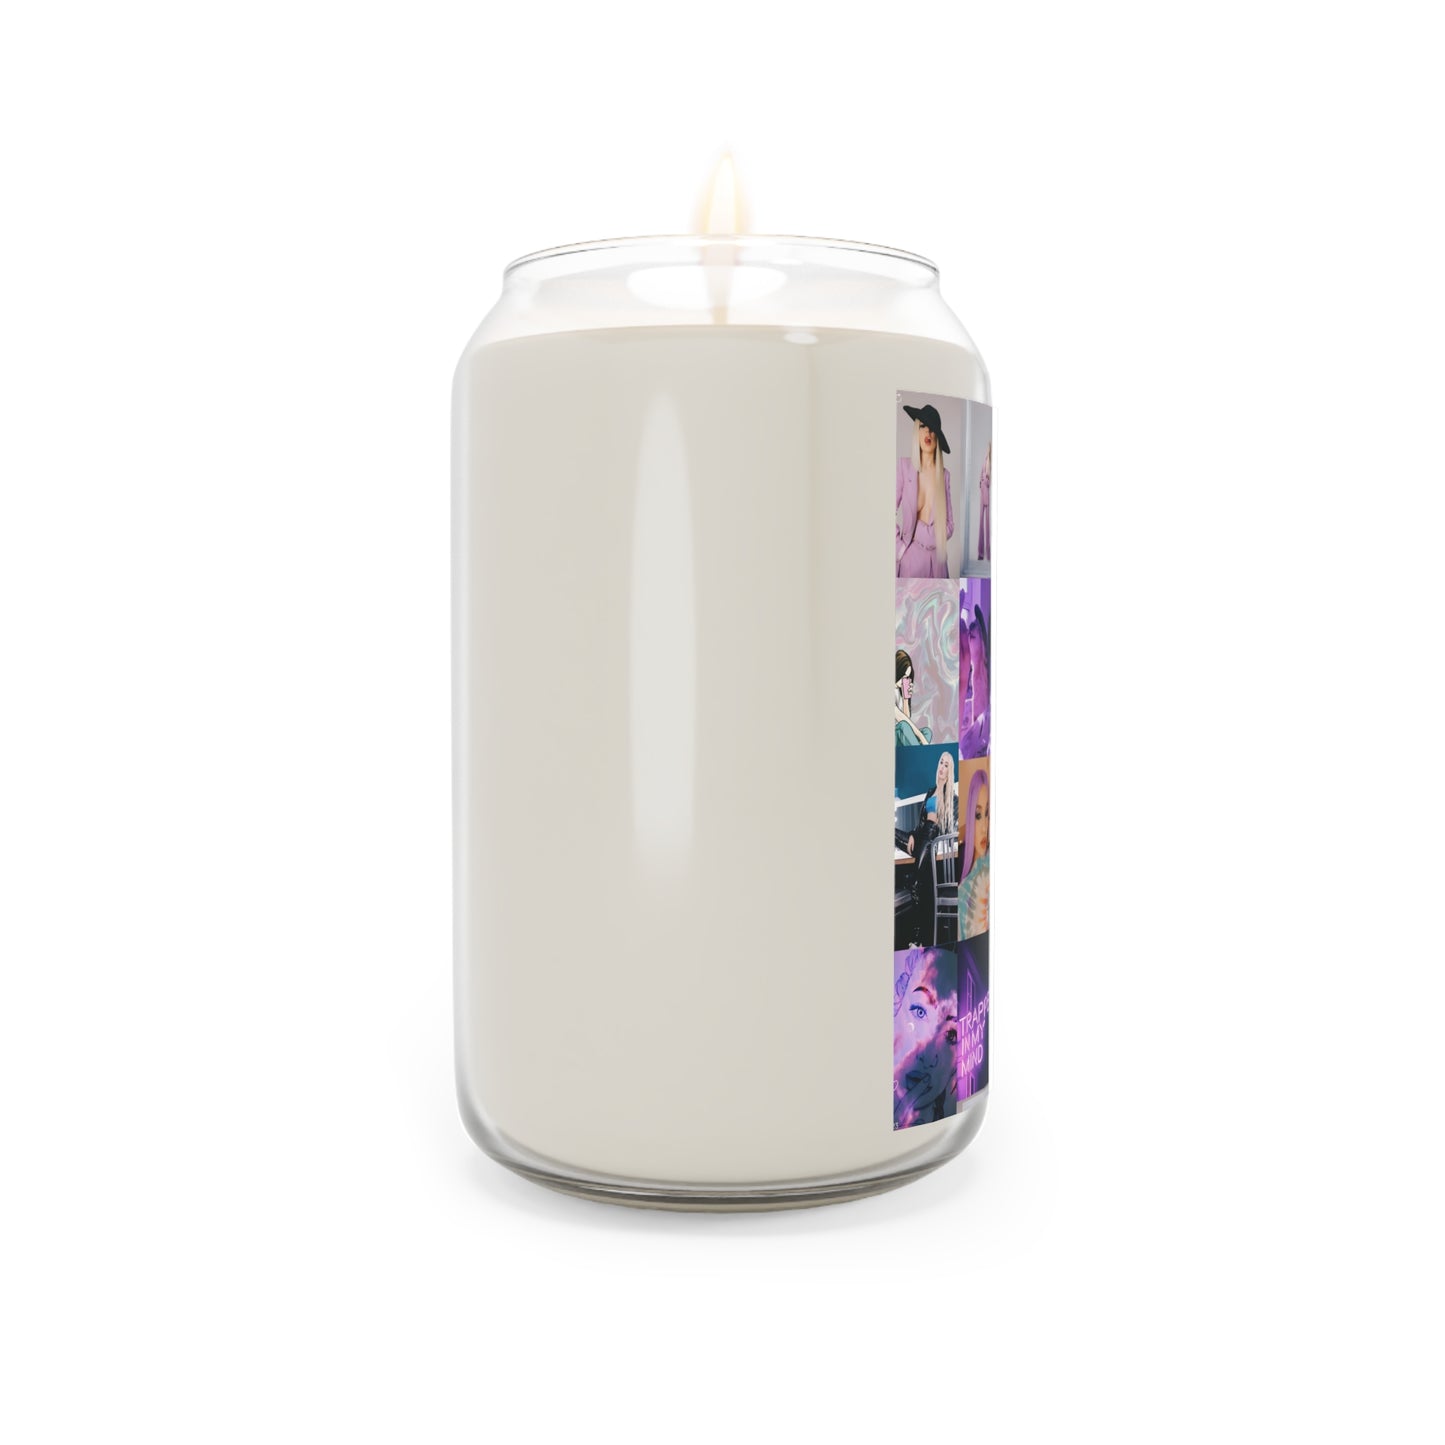 Ava Max Belladonna Photo Collage Scented Candle